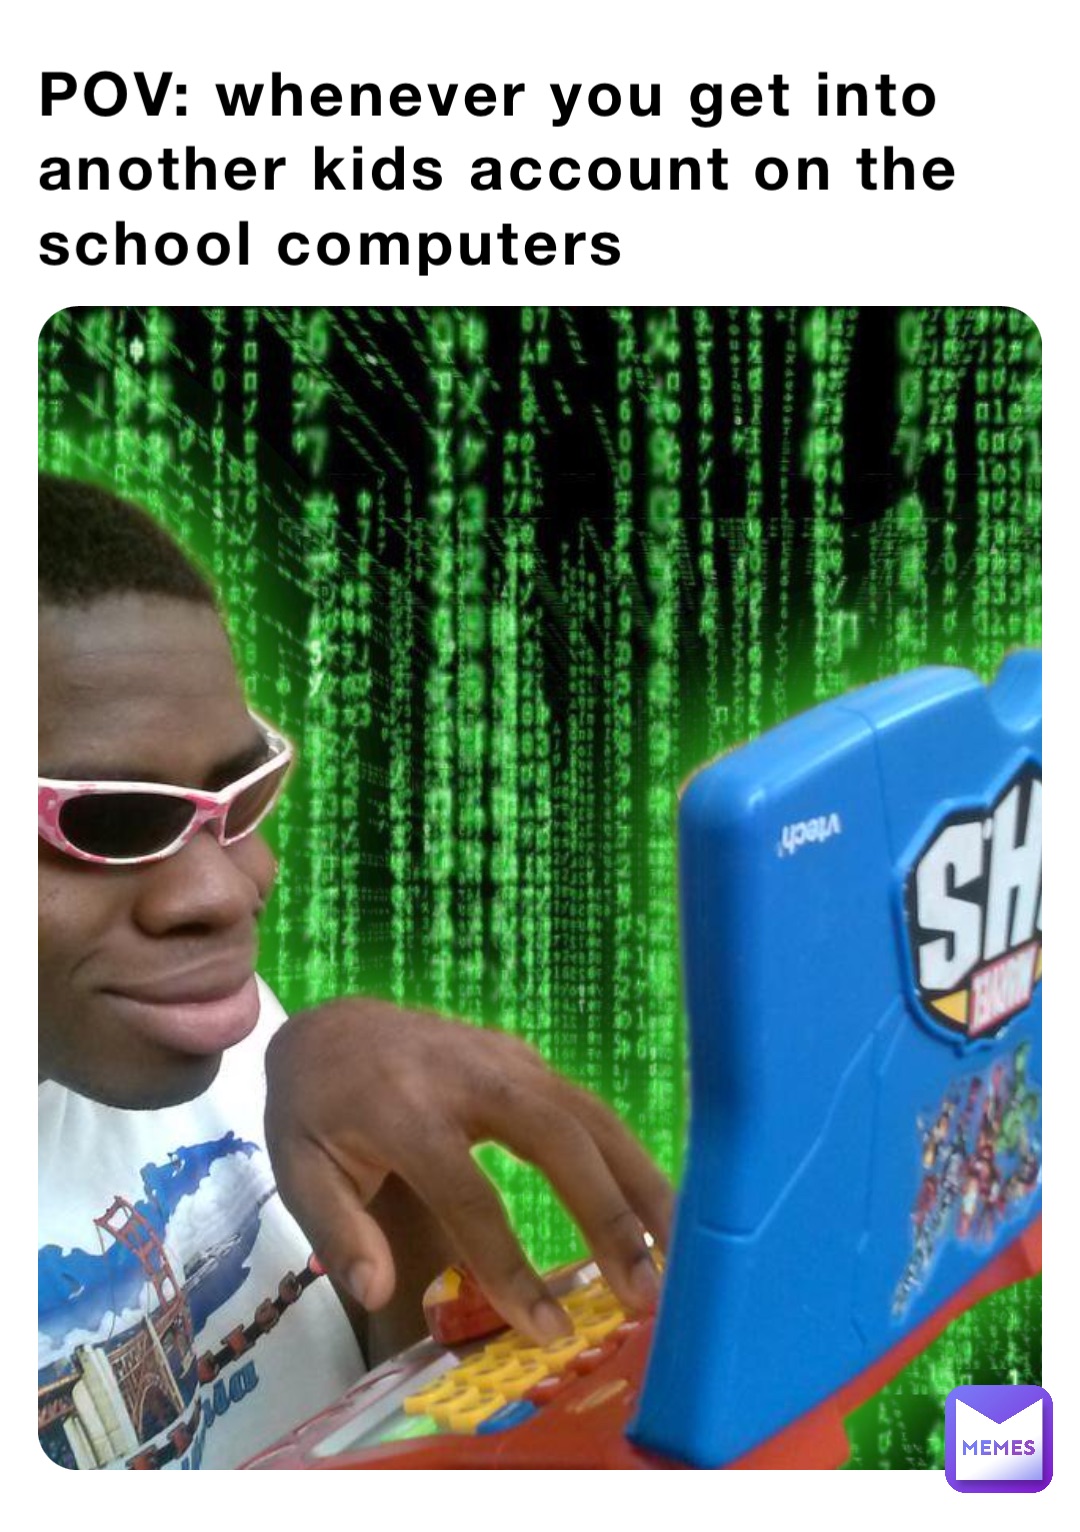 POV: whenever you get into another kids account on the school computers